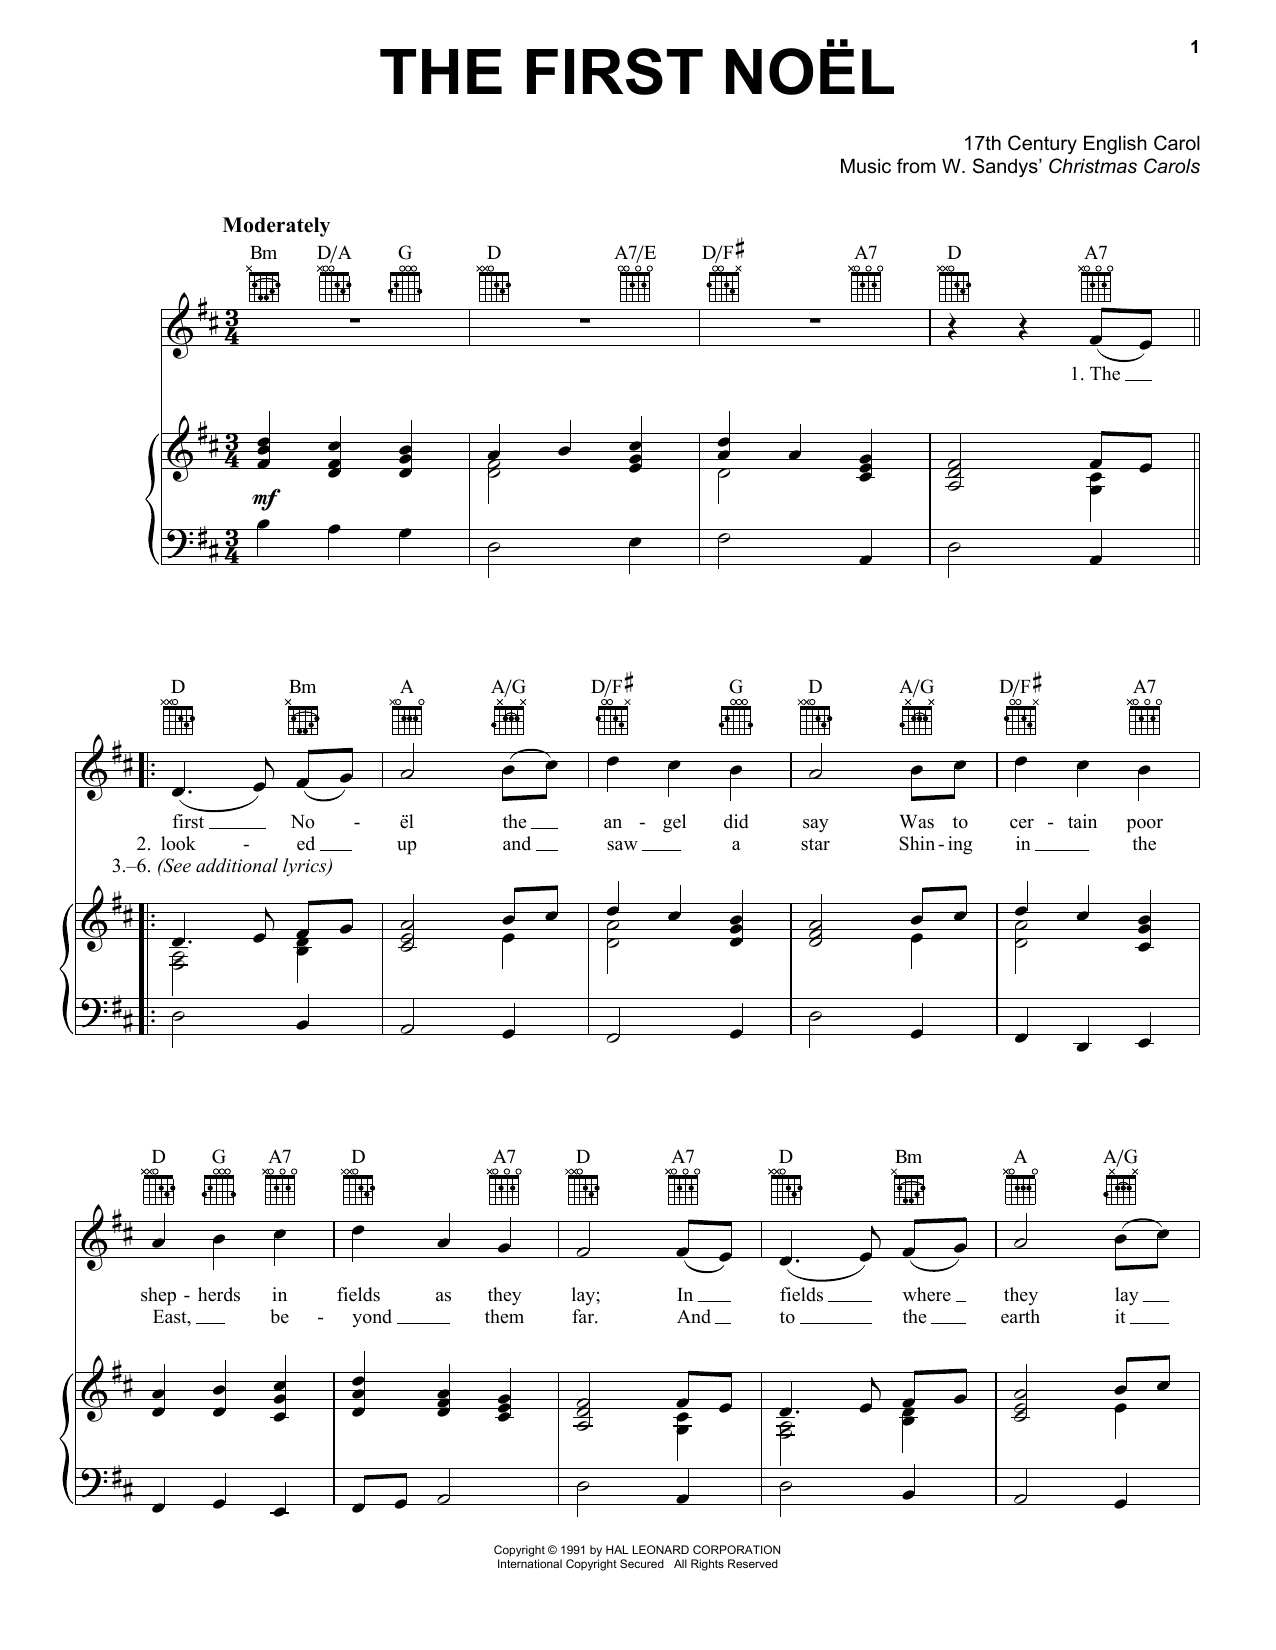 17th Century English Carol The First Noel sheet music notes and chords. Download Printable PDF.